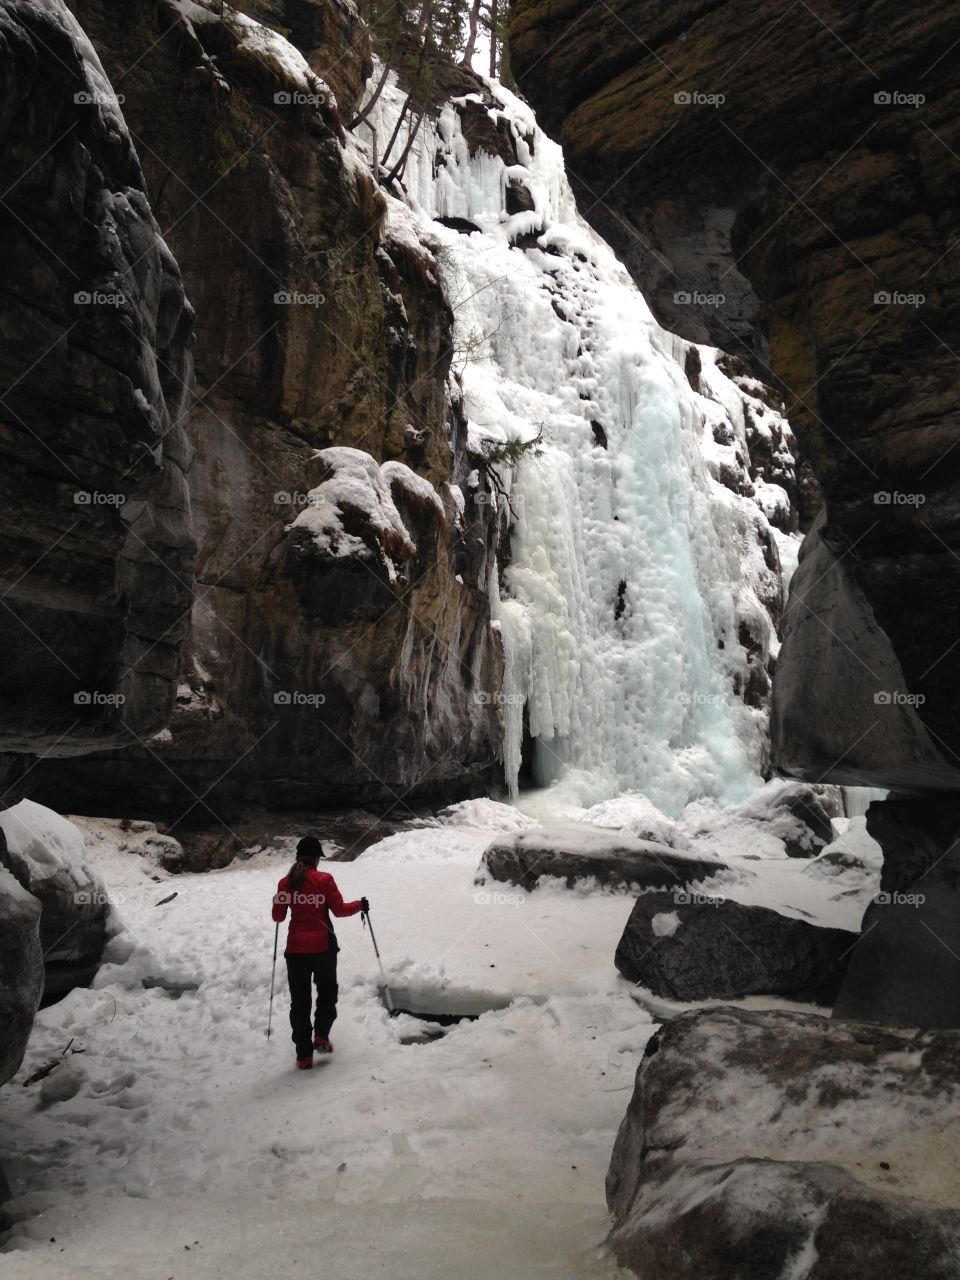 Frozen waterfall in the Johnston Canyons 